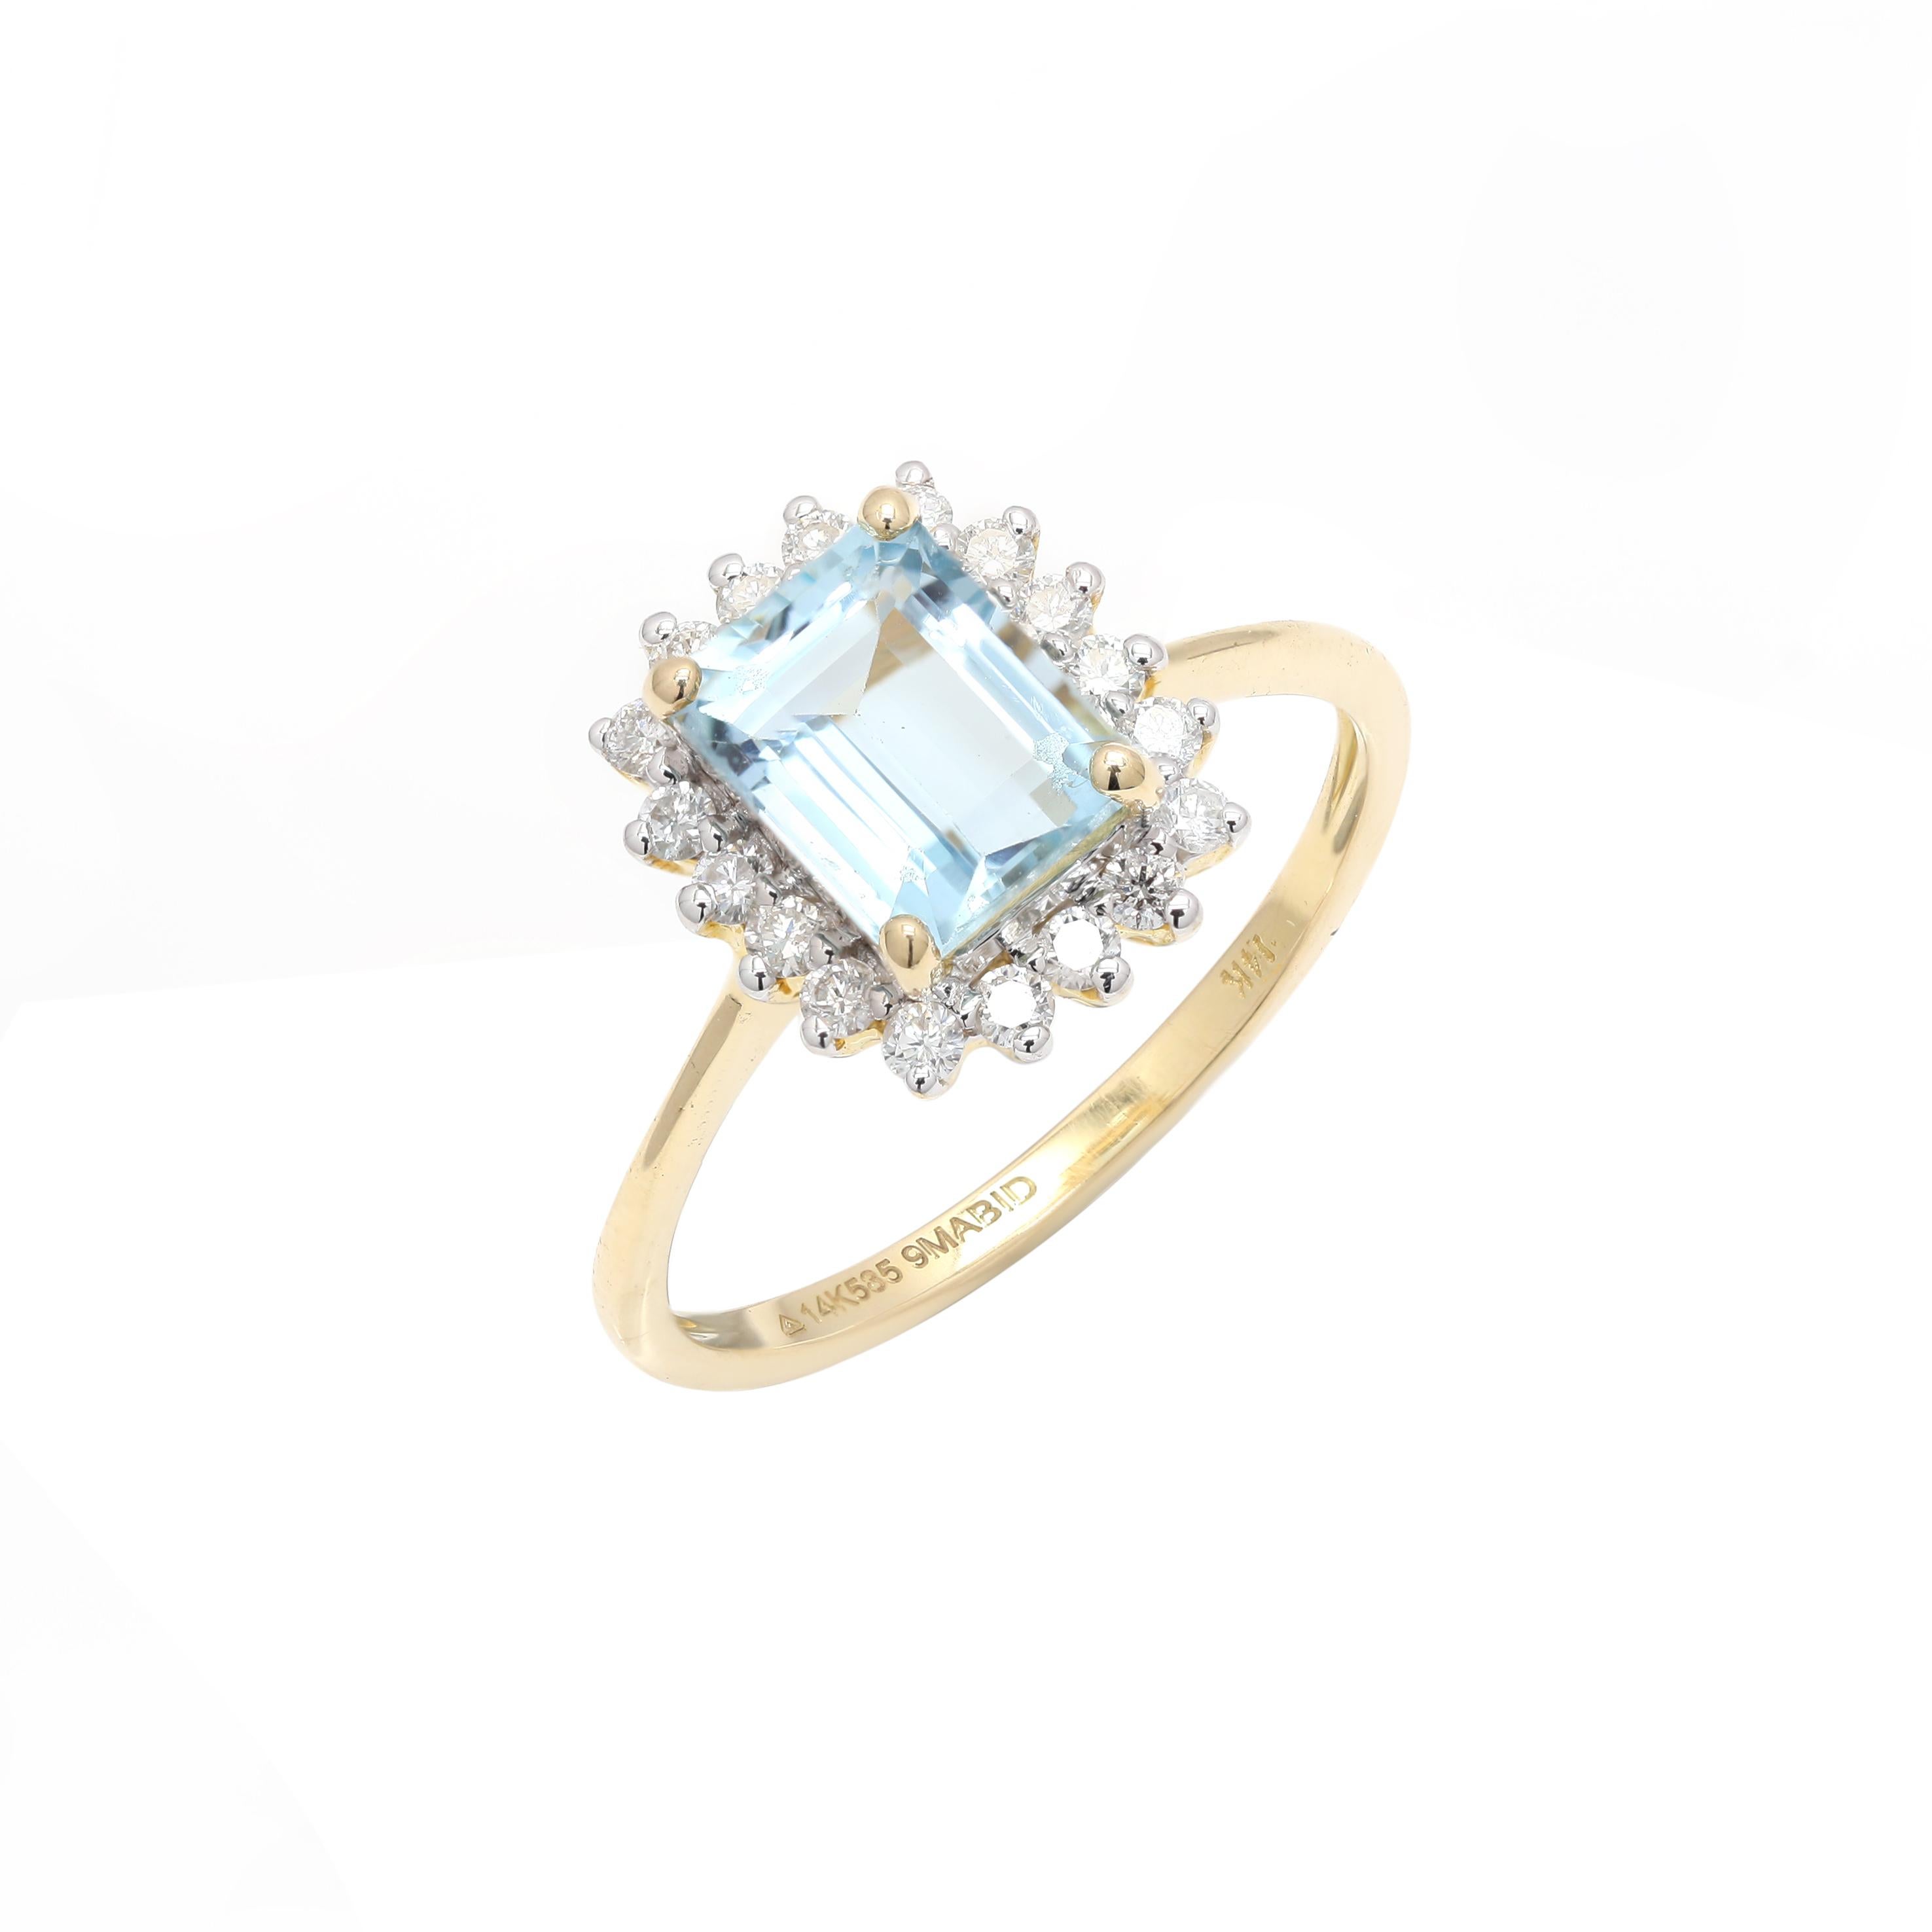 For Sale:  1.95 ct Octagon Cut Aquamarine Ring with Halo Diamond in 14kt Solid Yellow Gold 4